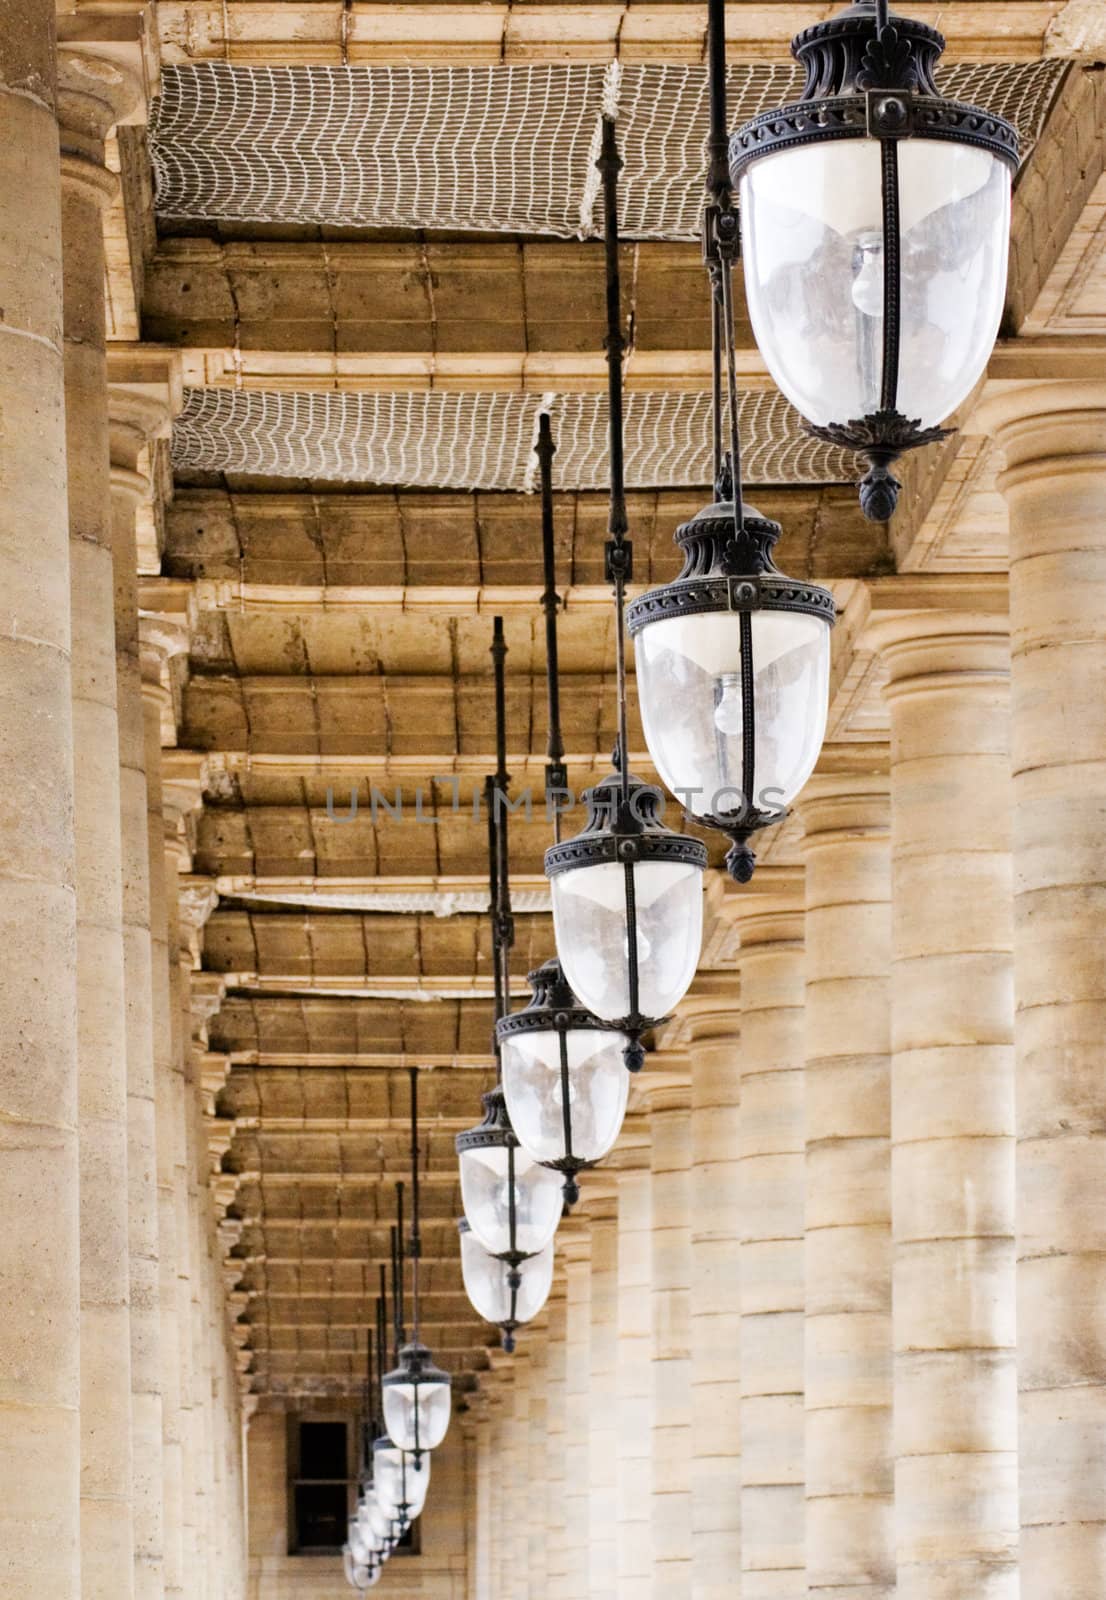 Archway with Lamps by winterling